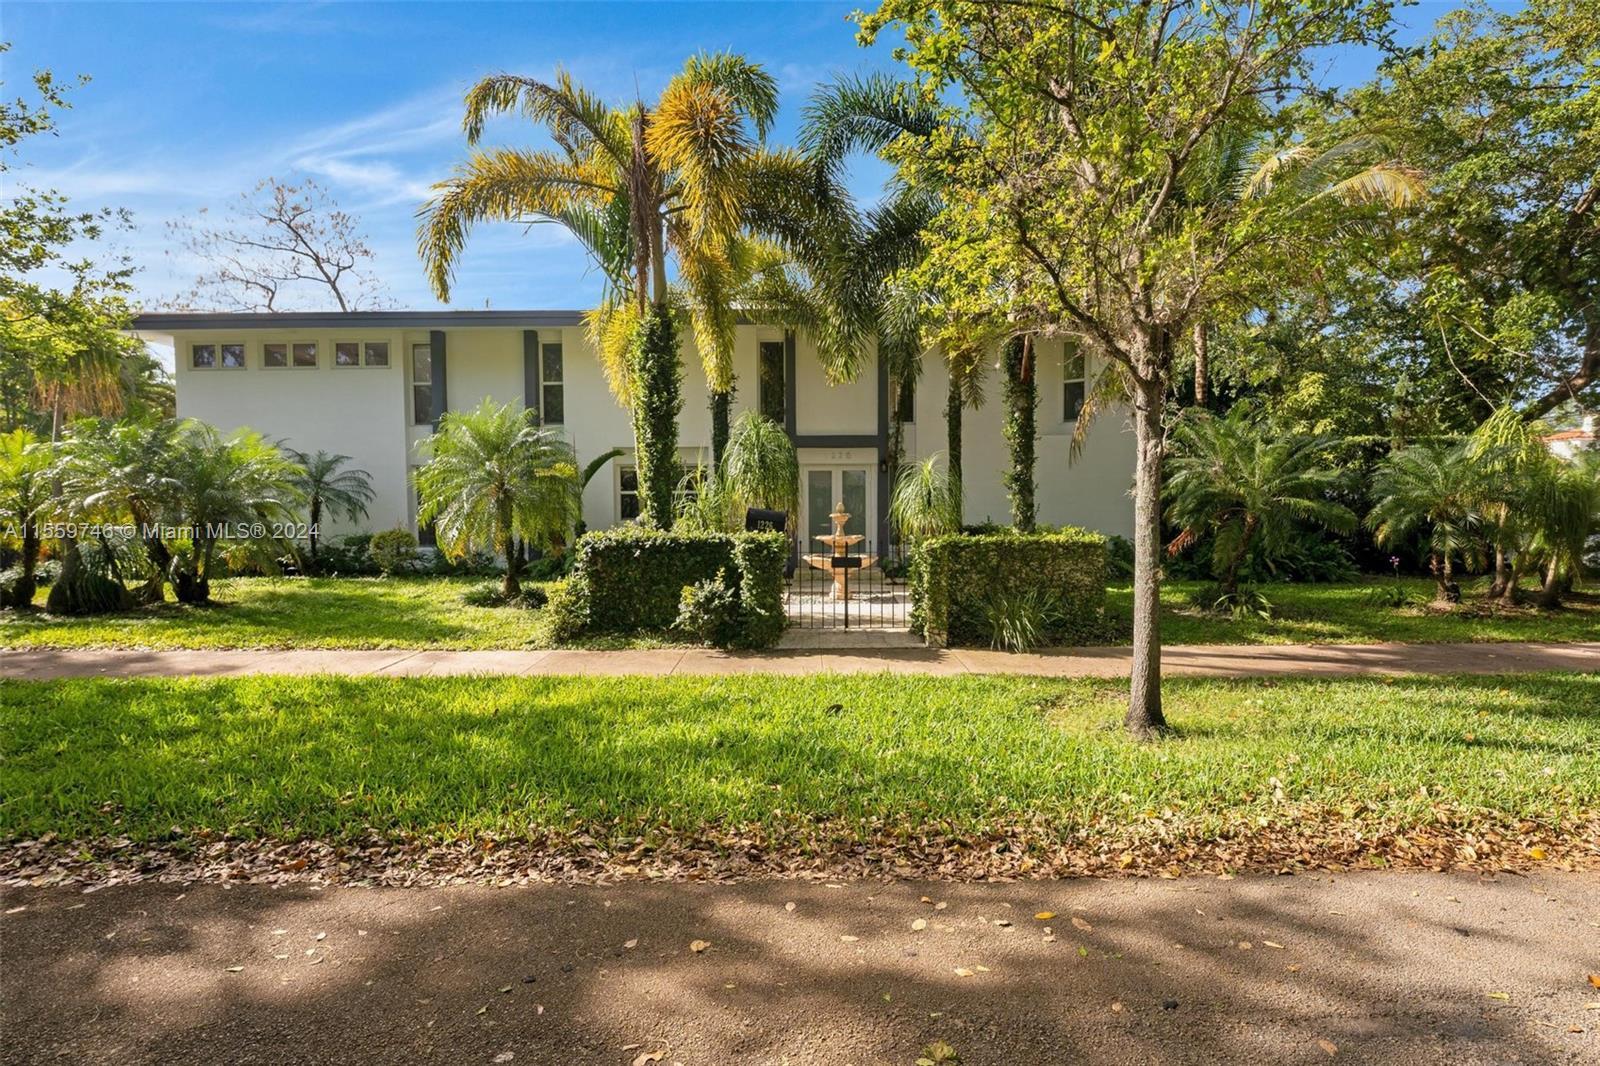 Photo of 1226 San Miguel Ave in Coral Gables, FL